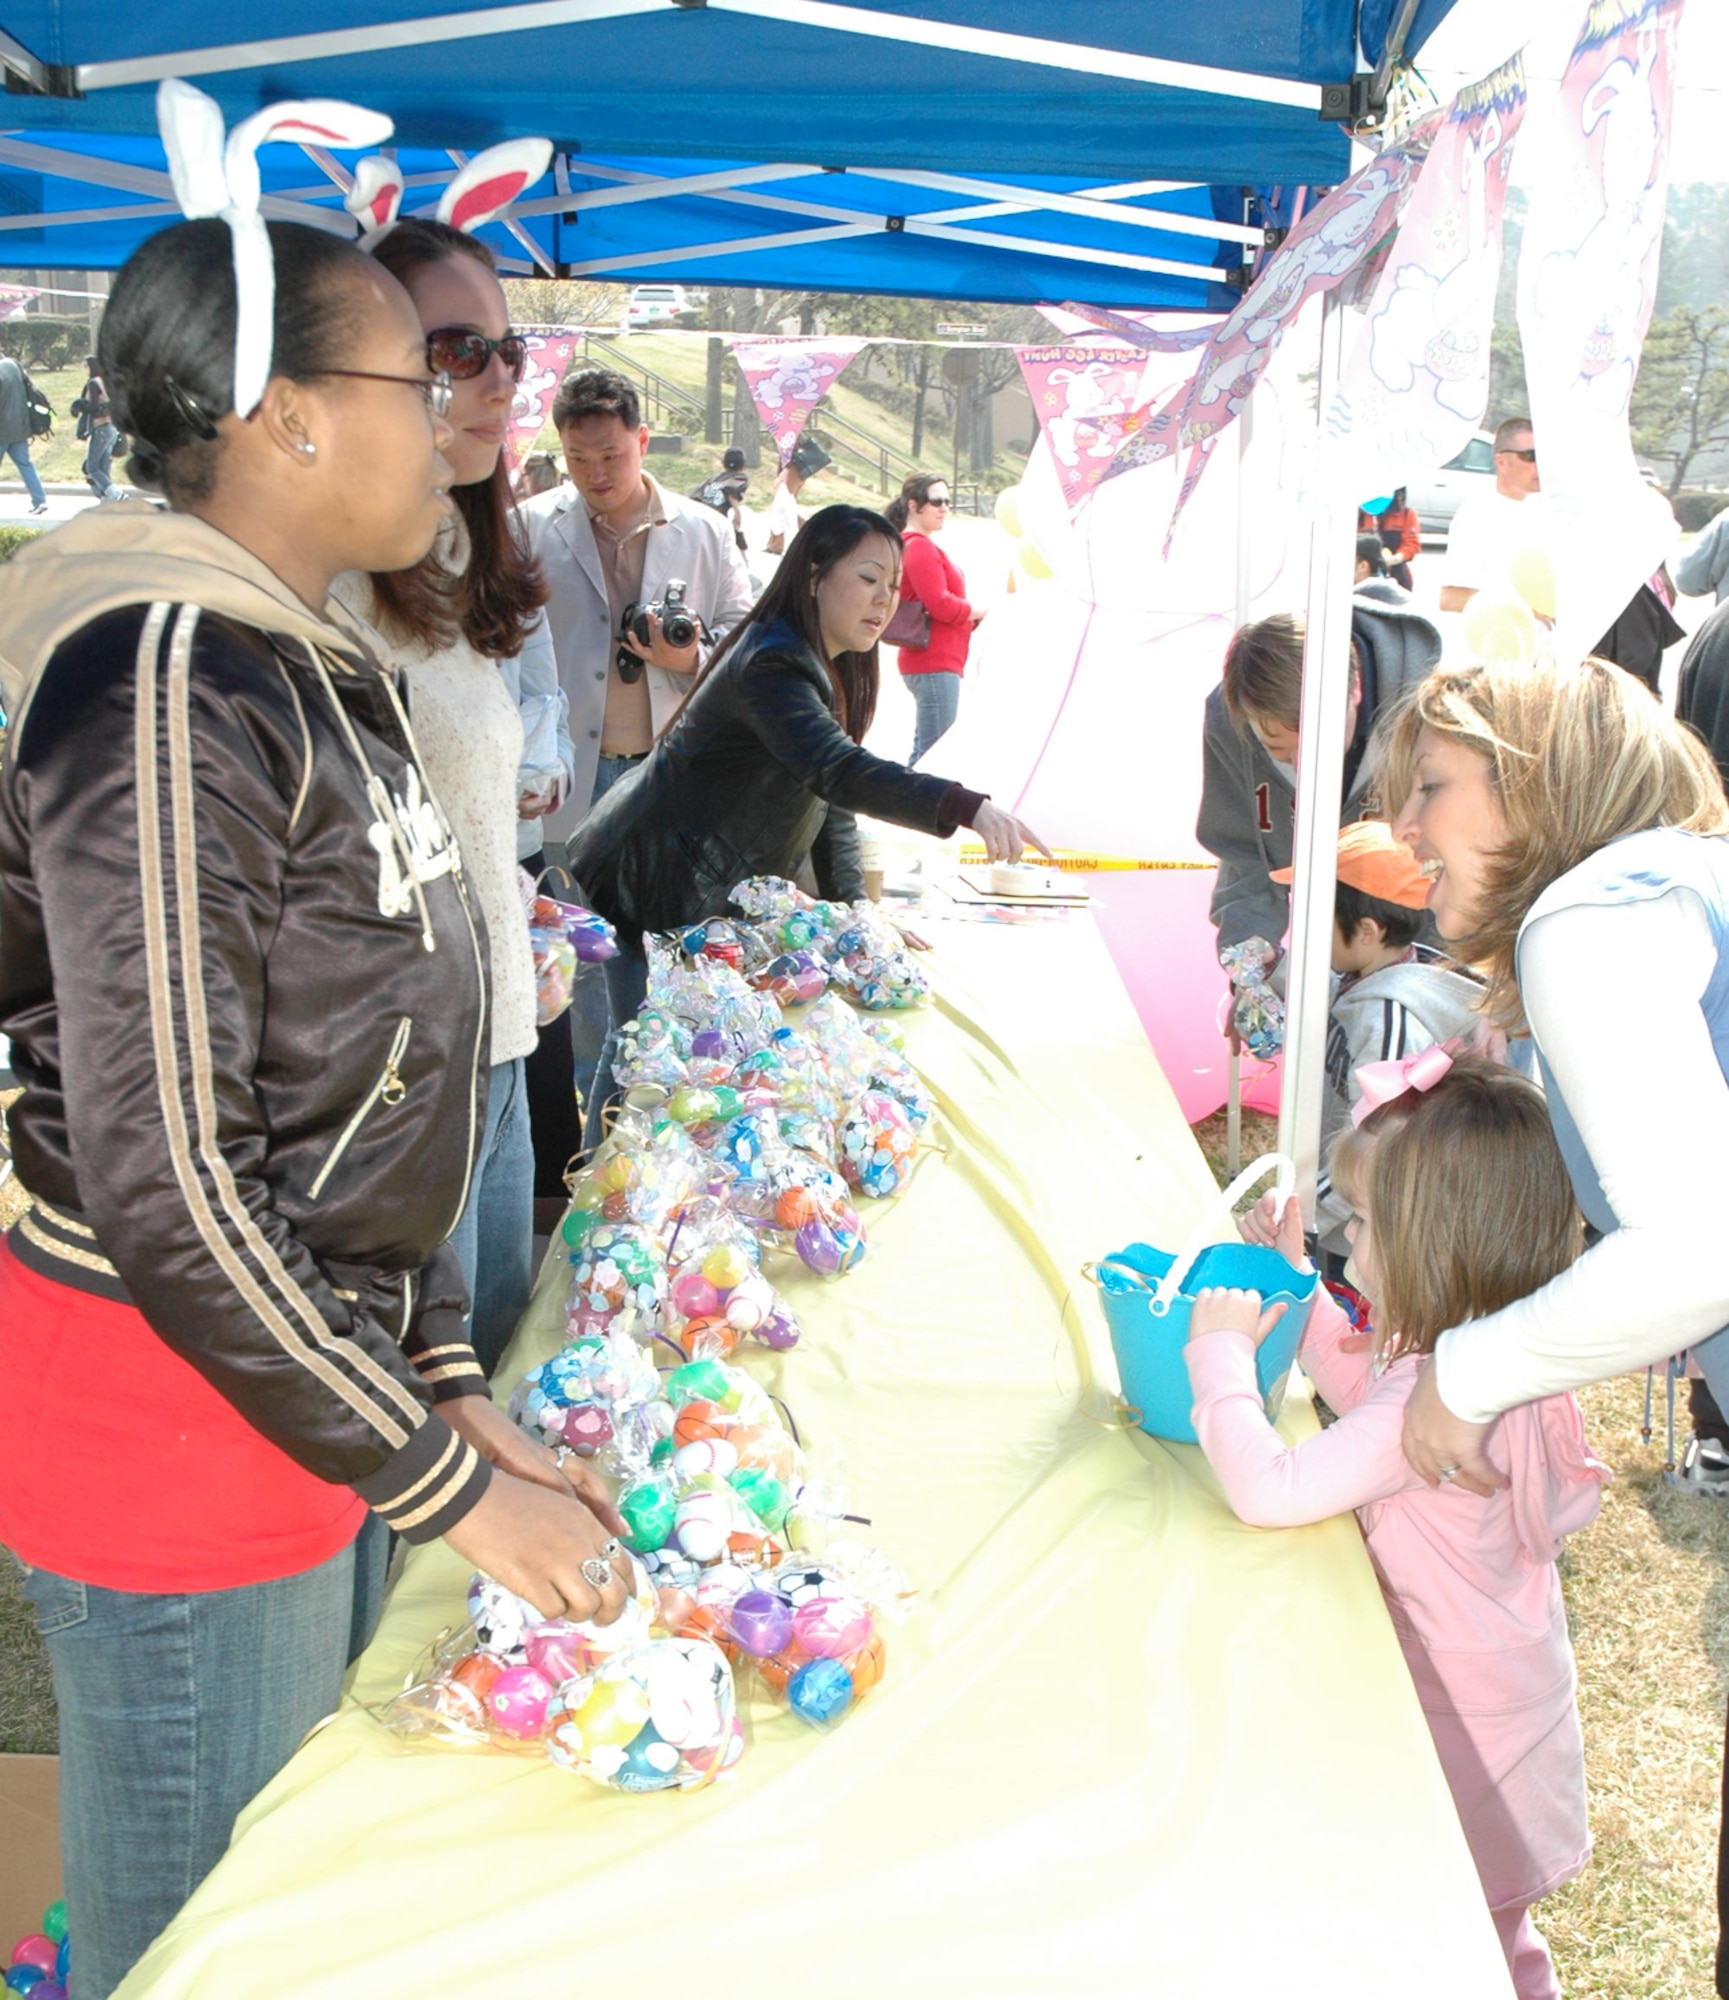 OSAN AIR BASE, Republic of Korea --  Volunteers hand out candy to children at the Easter Egg Hunt at Turumi Park on Saturday. The 51st Services Squadron hosted the event, which allowed children to trade plastic eggs for candy. (U.S. Air Force photo by Staff Sgt. Benjamin Rojek)